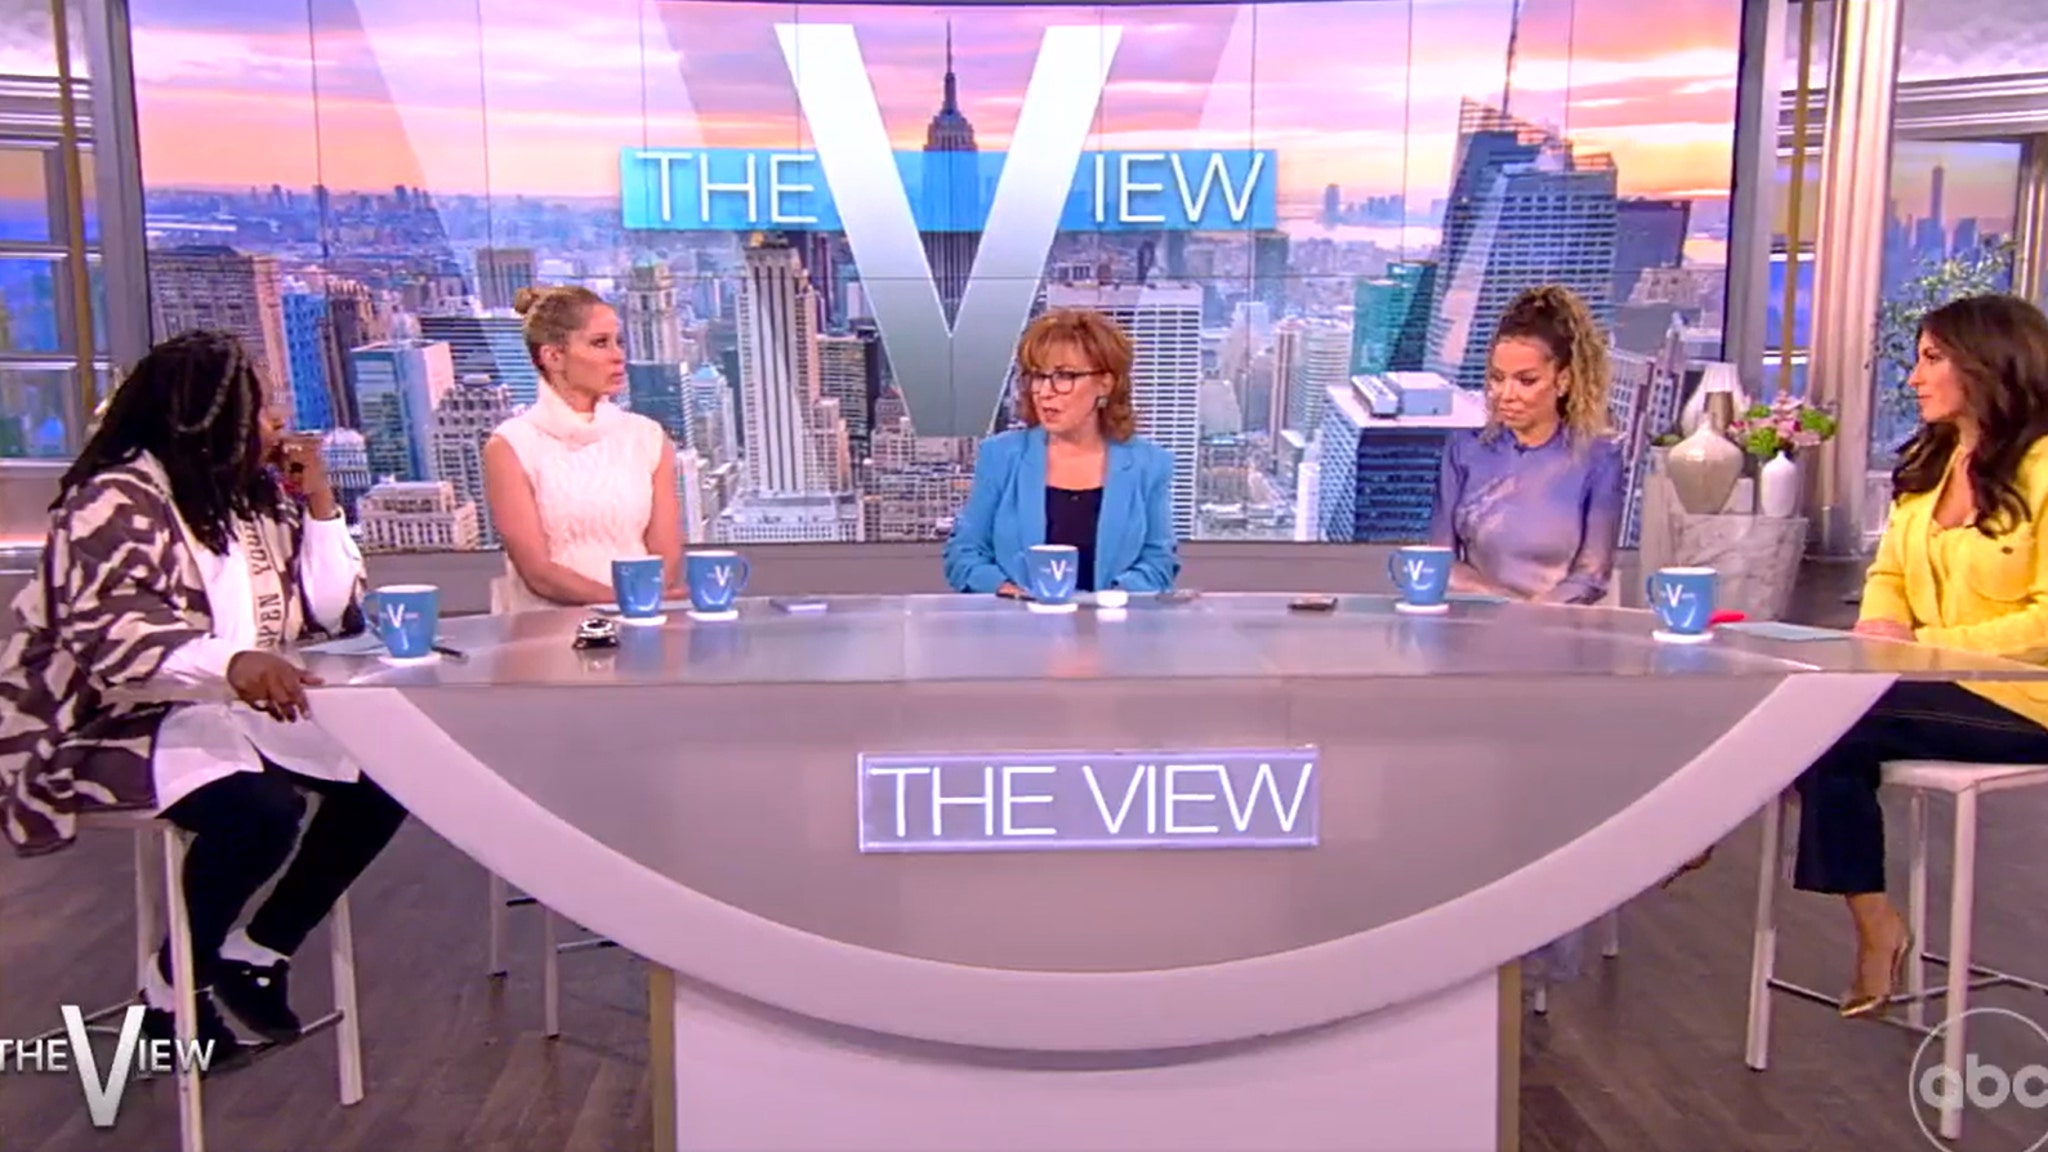 The View Cuts Sara Haines' NSFW Comment About Golden Bachelor from Live Broadcast: Watch